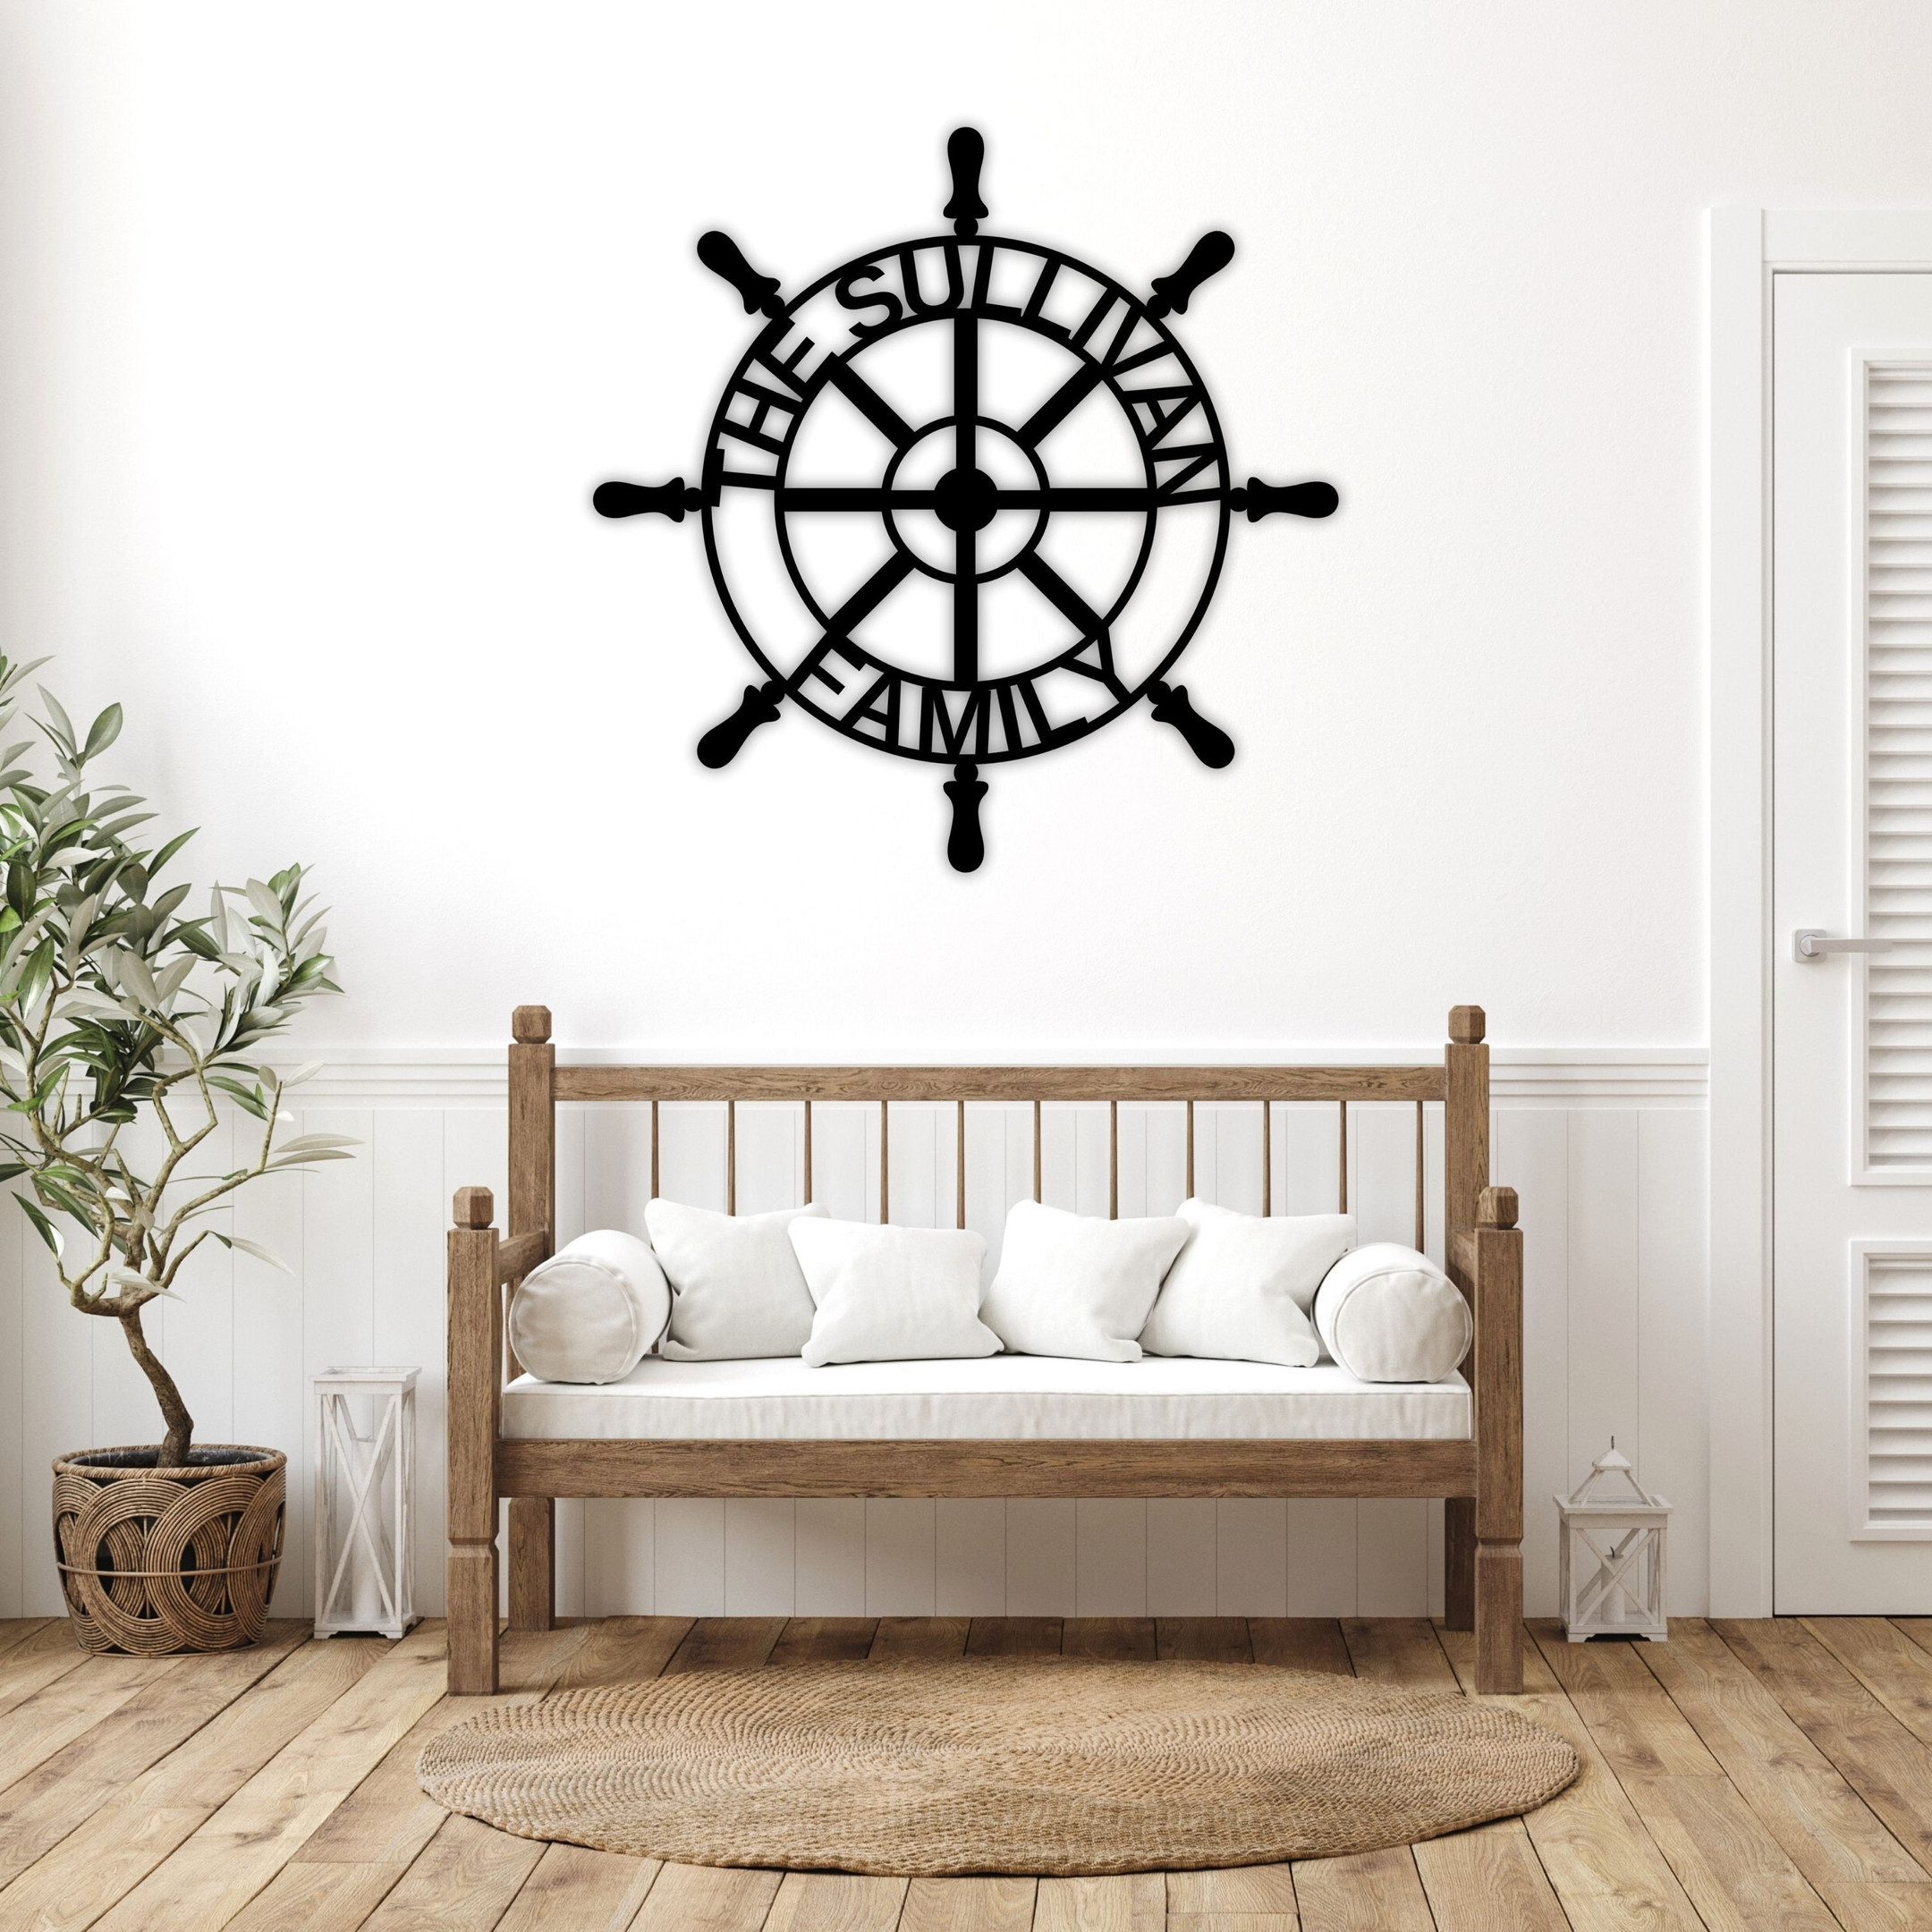 Personalized Wheel Ship Metal Sign, Custom Wheel Ship Wall Art, Lake House Decor, Beach House Decor, Family Name Sign, Nautical Decorations, Laser Cut Metal Signs Custom Gift Ideas 12x12IN